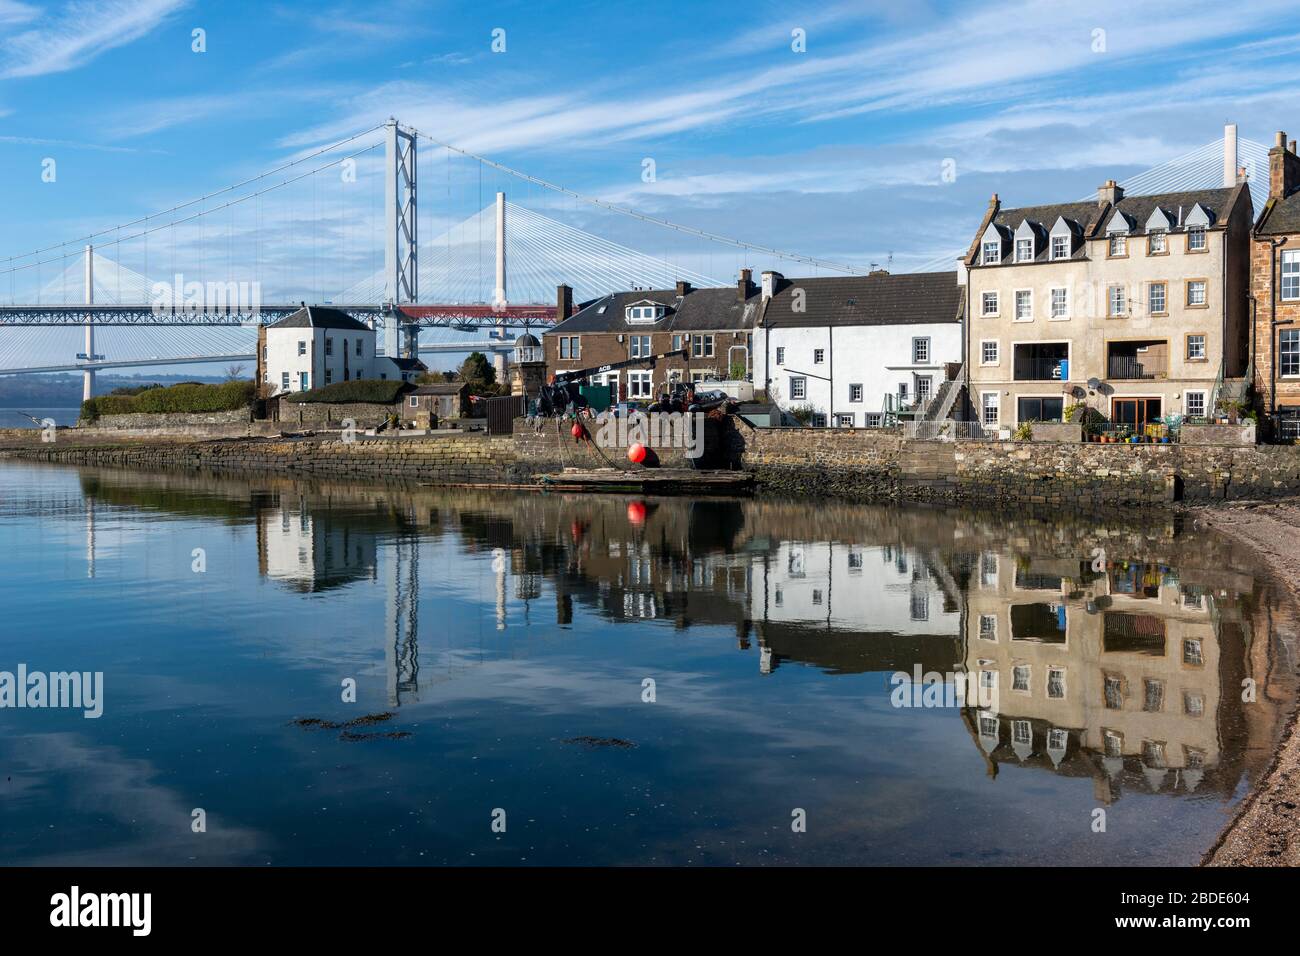 Houses on Main Street on South Bay, with Forth Road Bridge and Queensferry Crossing in background - North Queensferry, Fife, Scotland, UK Stock Photo